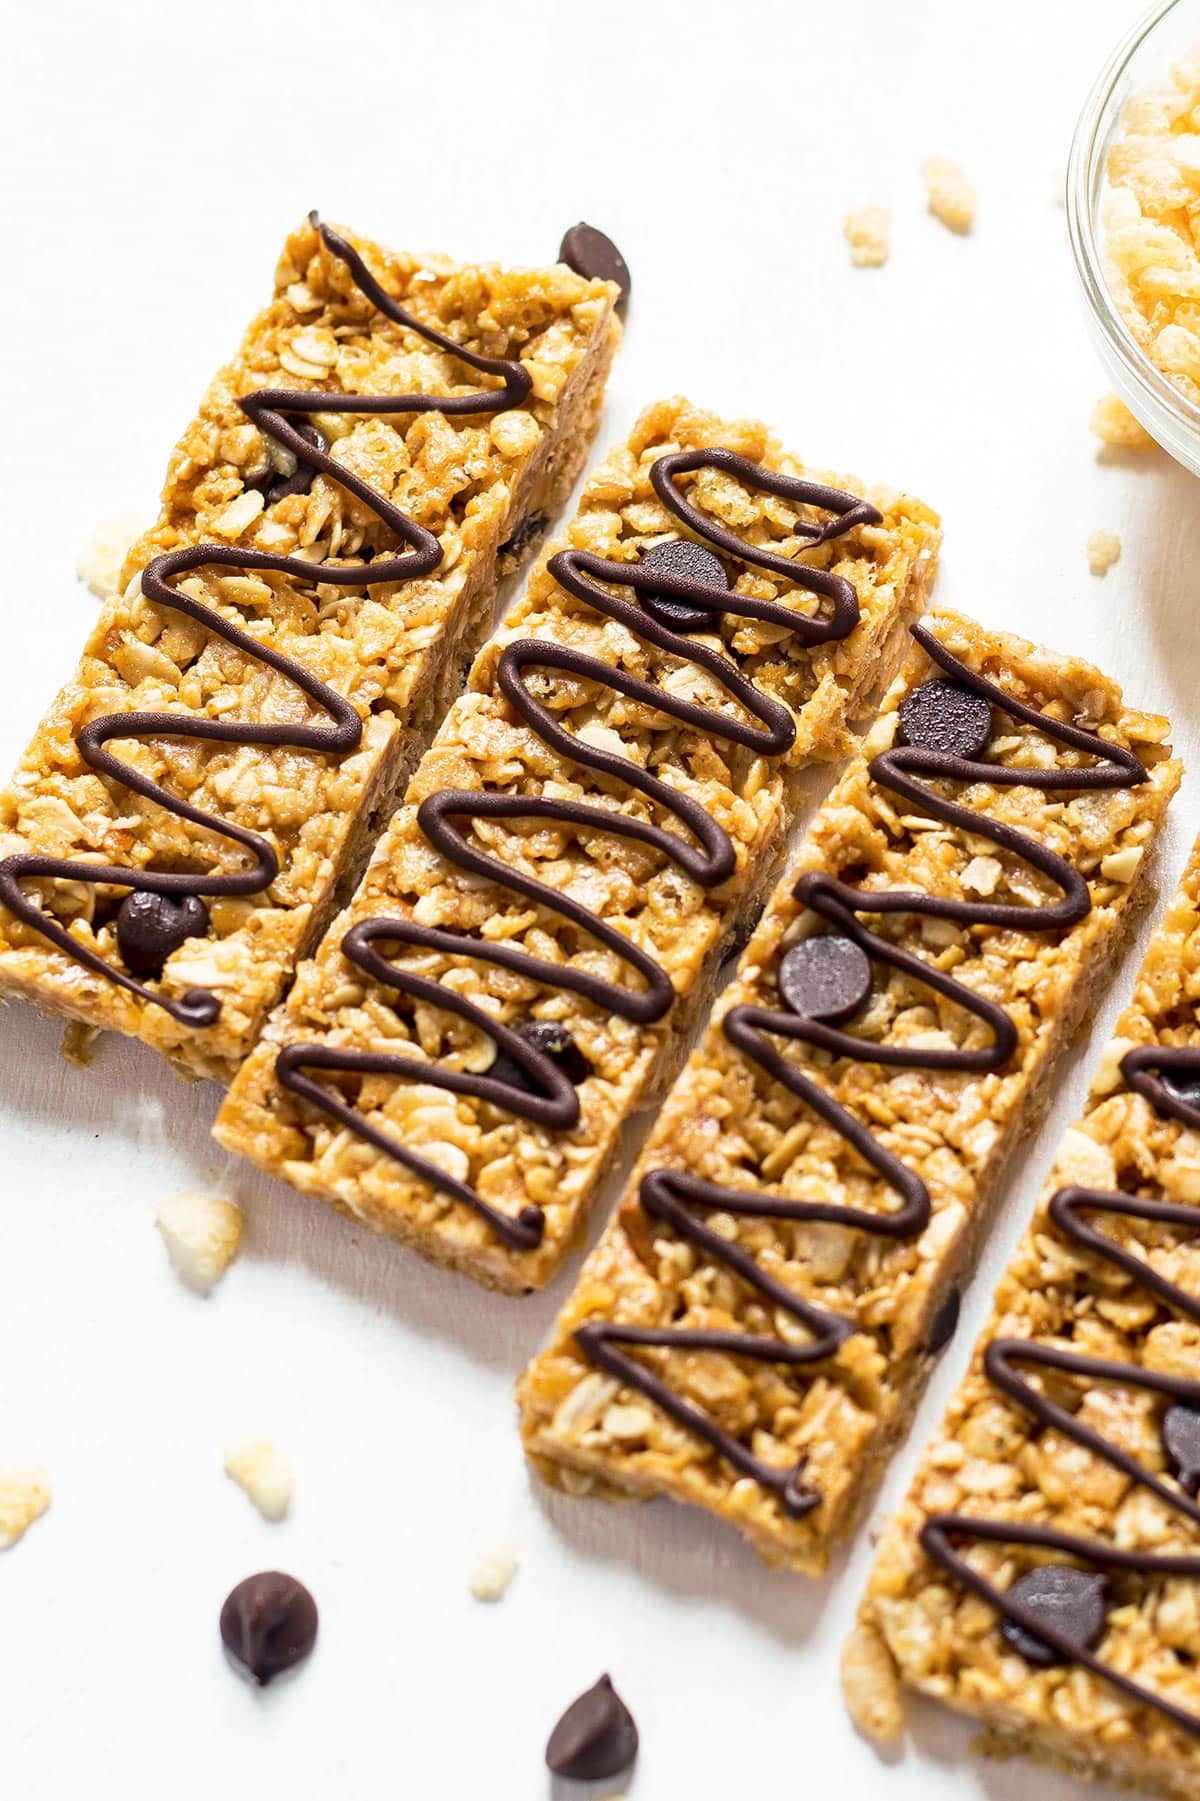 Healthy Granola bars with rice cereal and chocolate chips